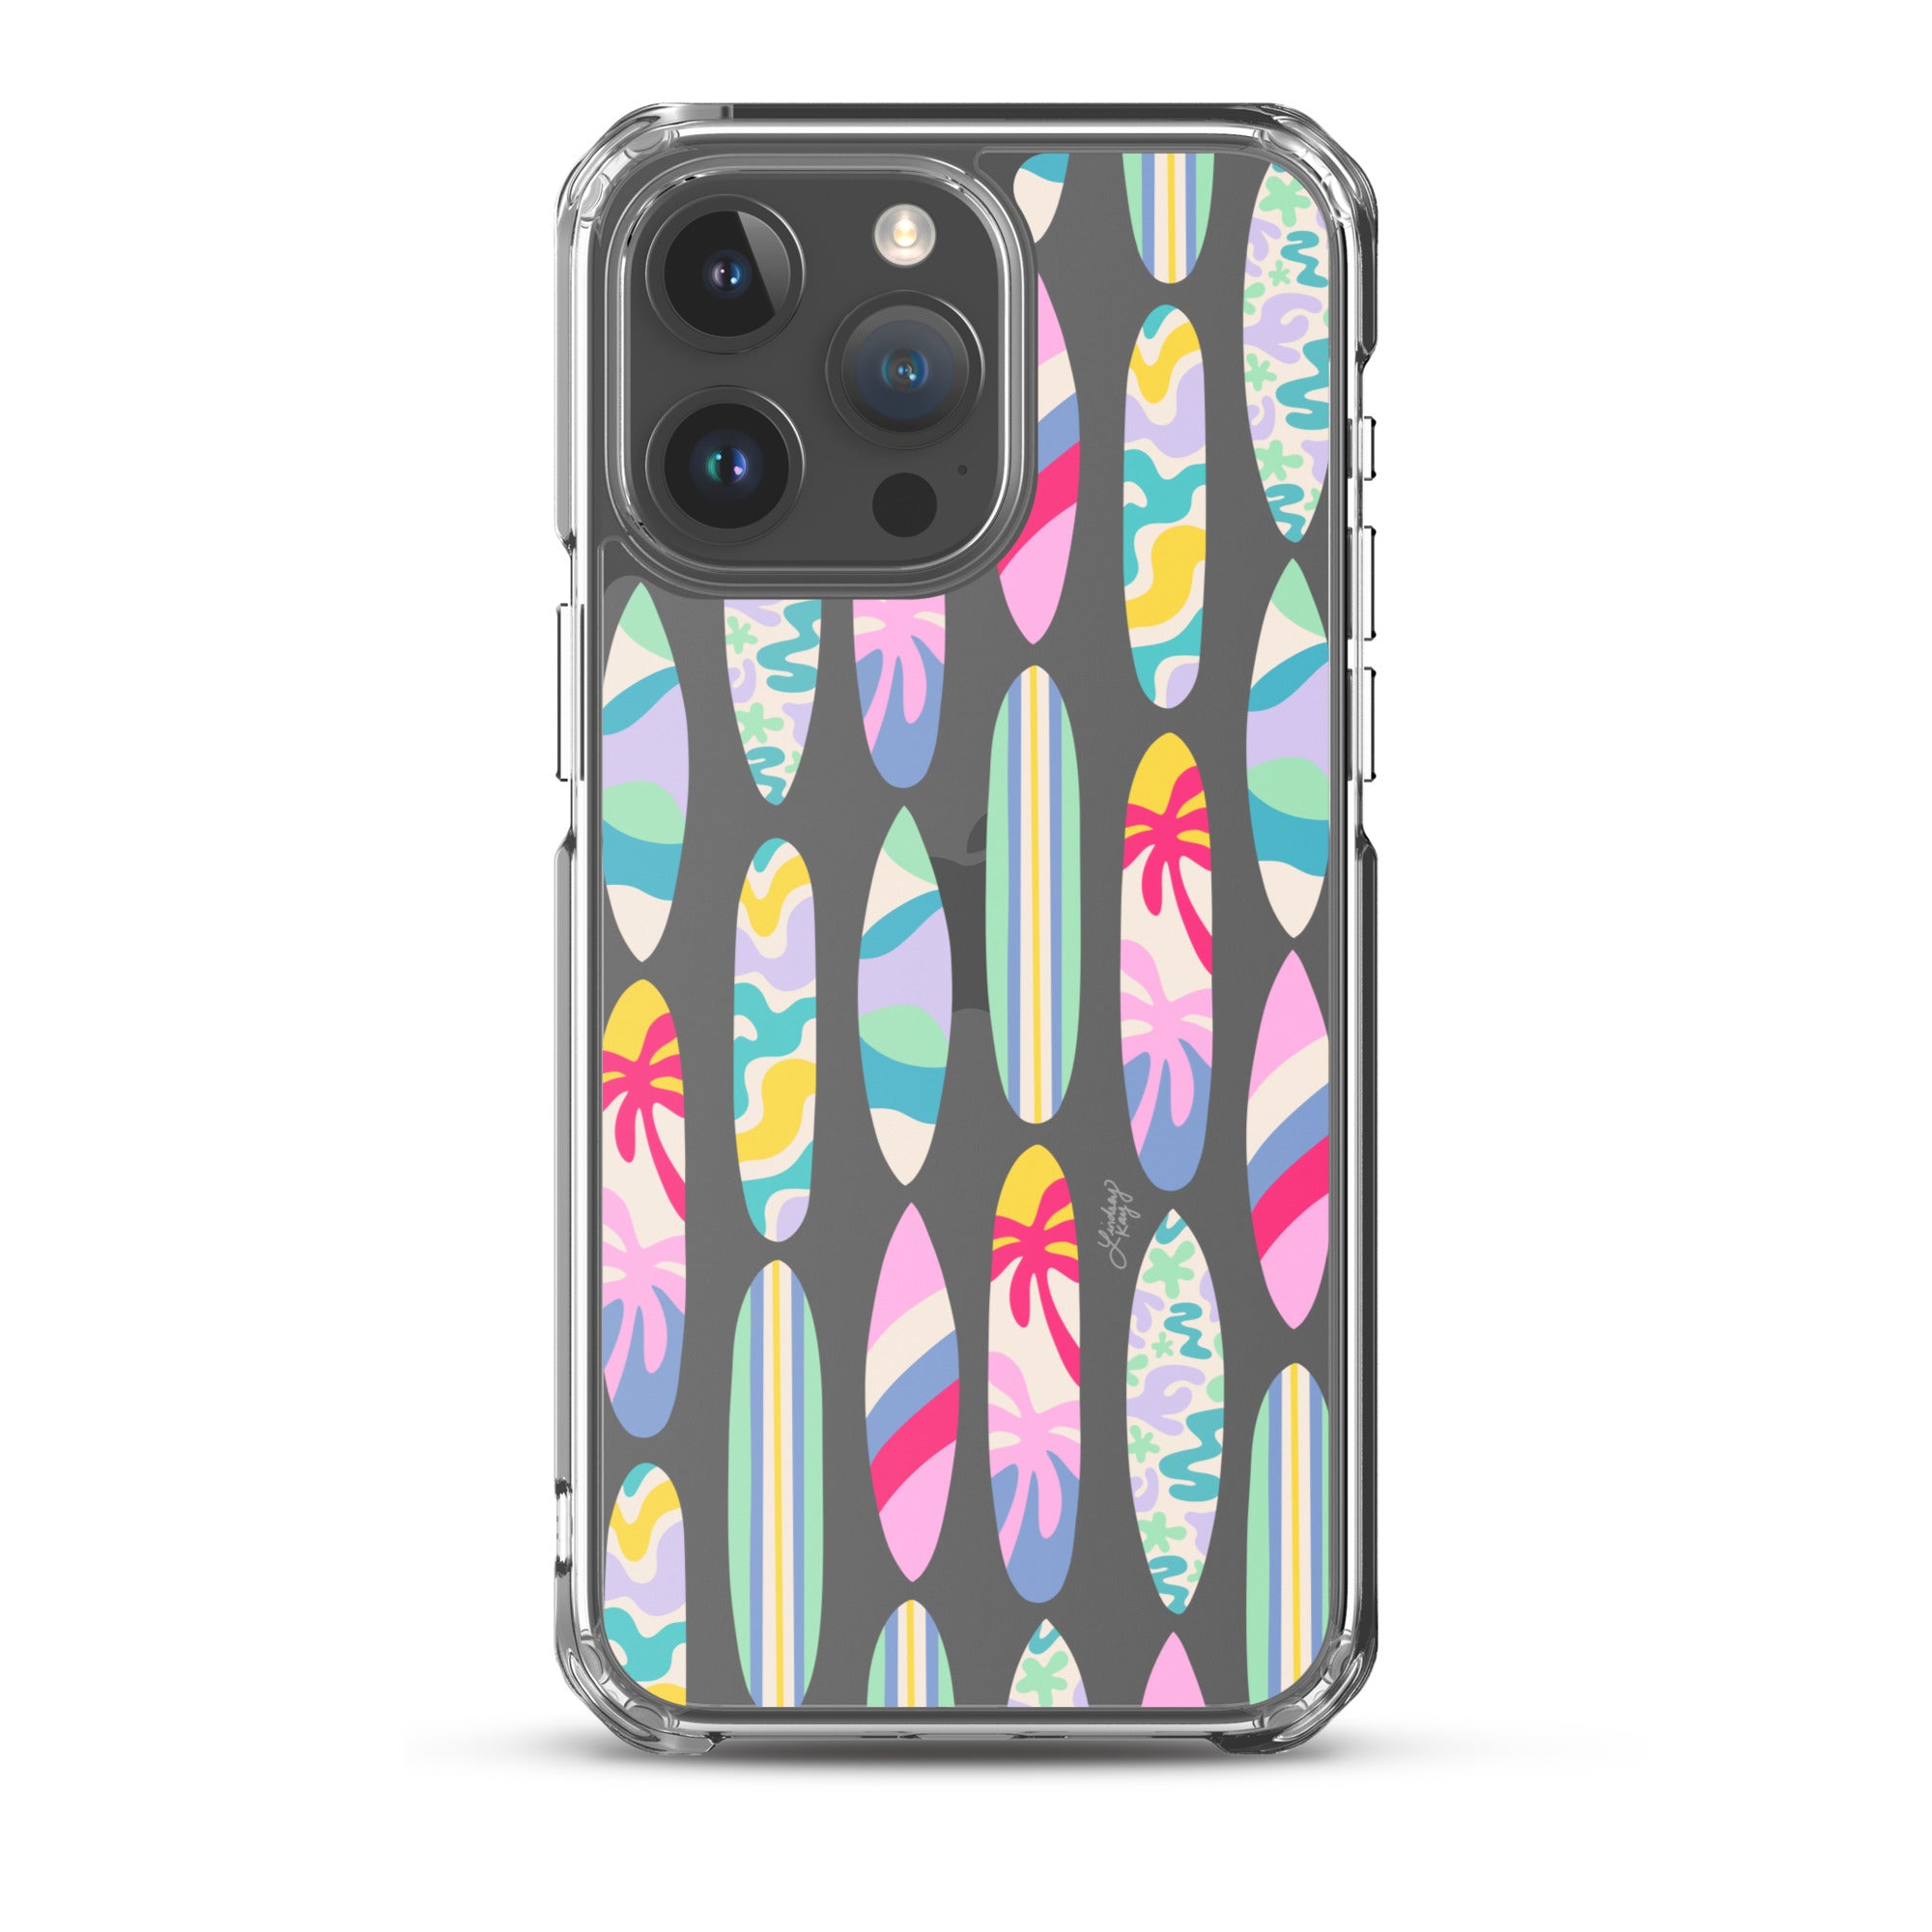 illustrated surf board pattern colorful bright iphone case cover durable clear mobile accessories trendy cute ocean beach lindsey kay collective